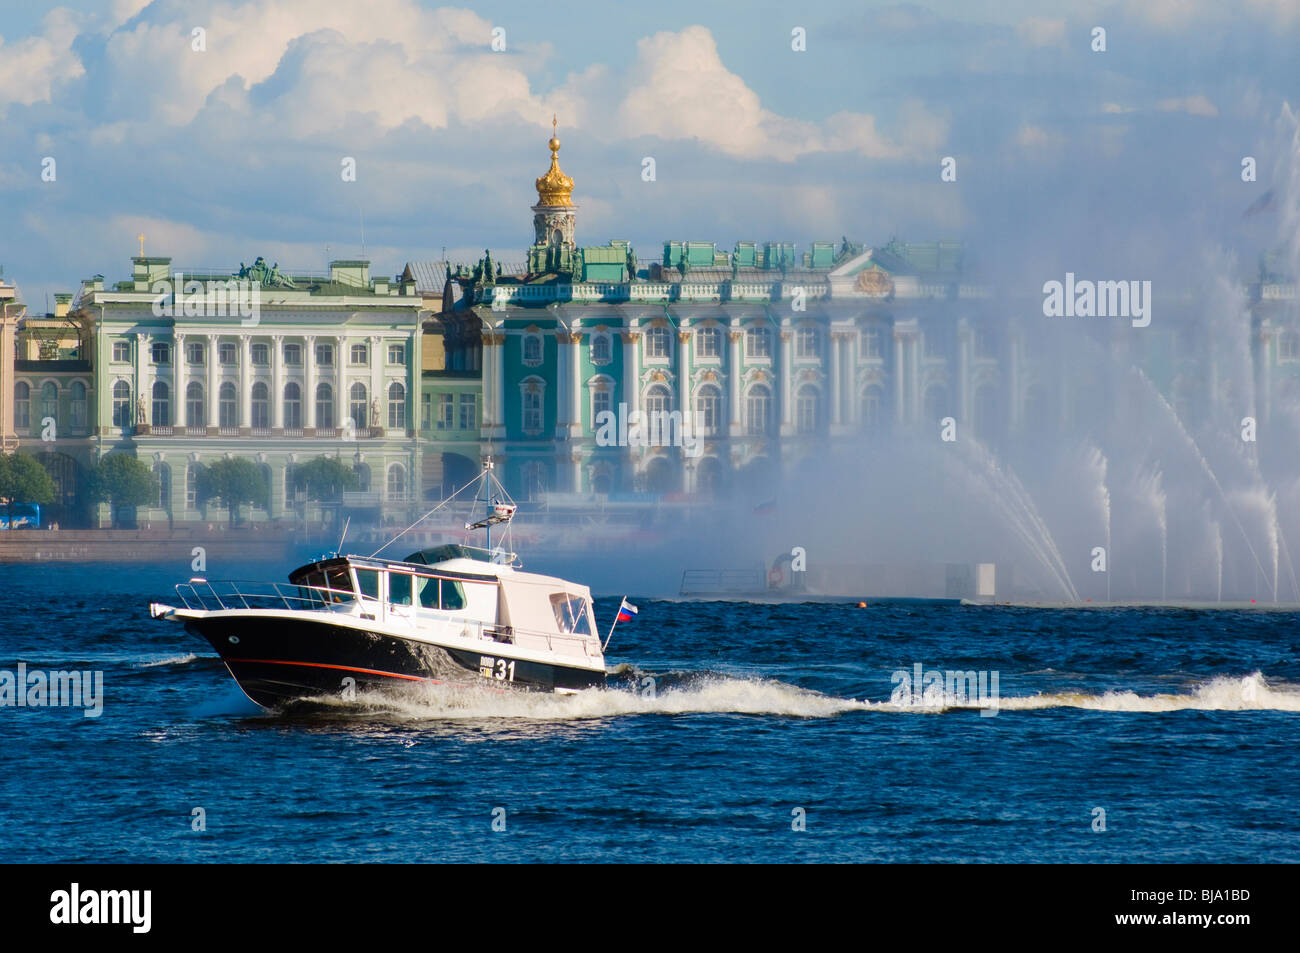 Motor-boat and fountains in the River Neva, St Petersburg, Russia, with the Winter Palace, now part of the Hermitage Museum Stock Photo